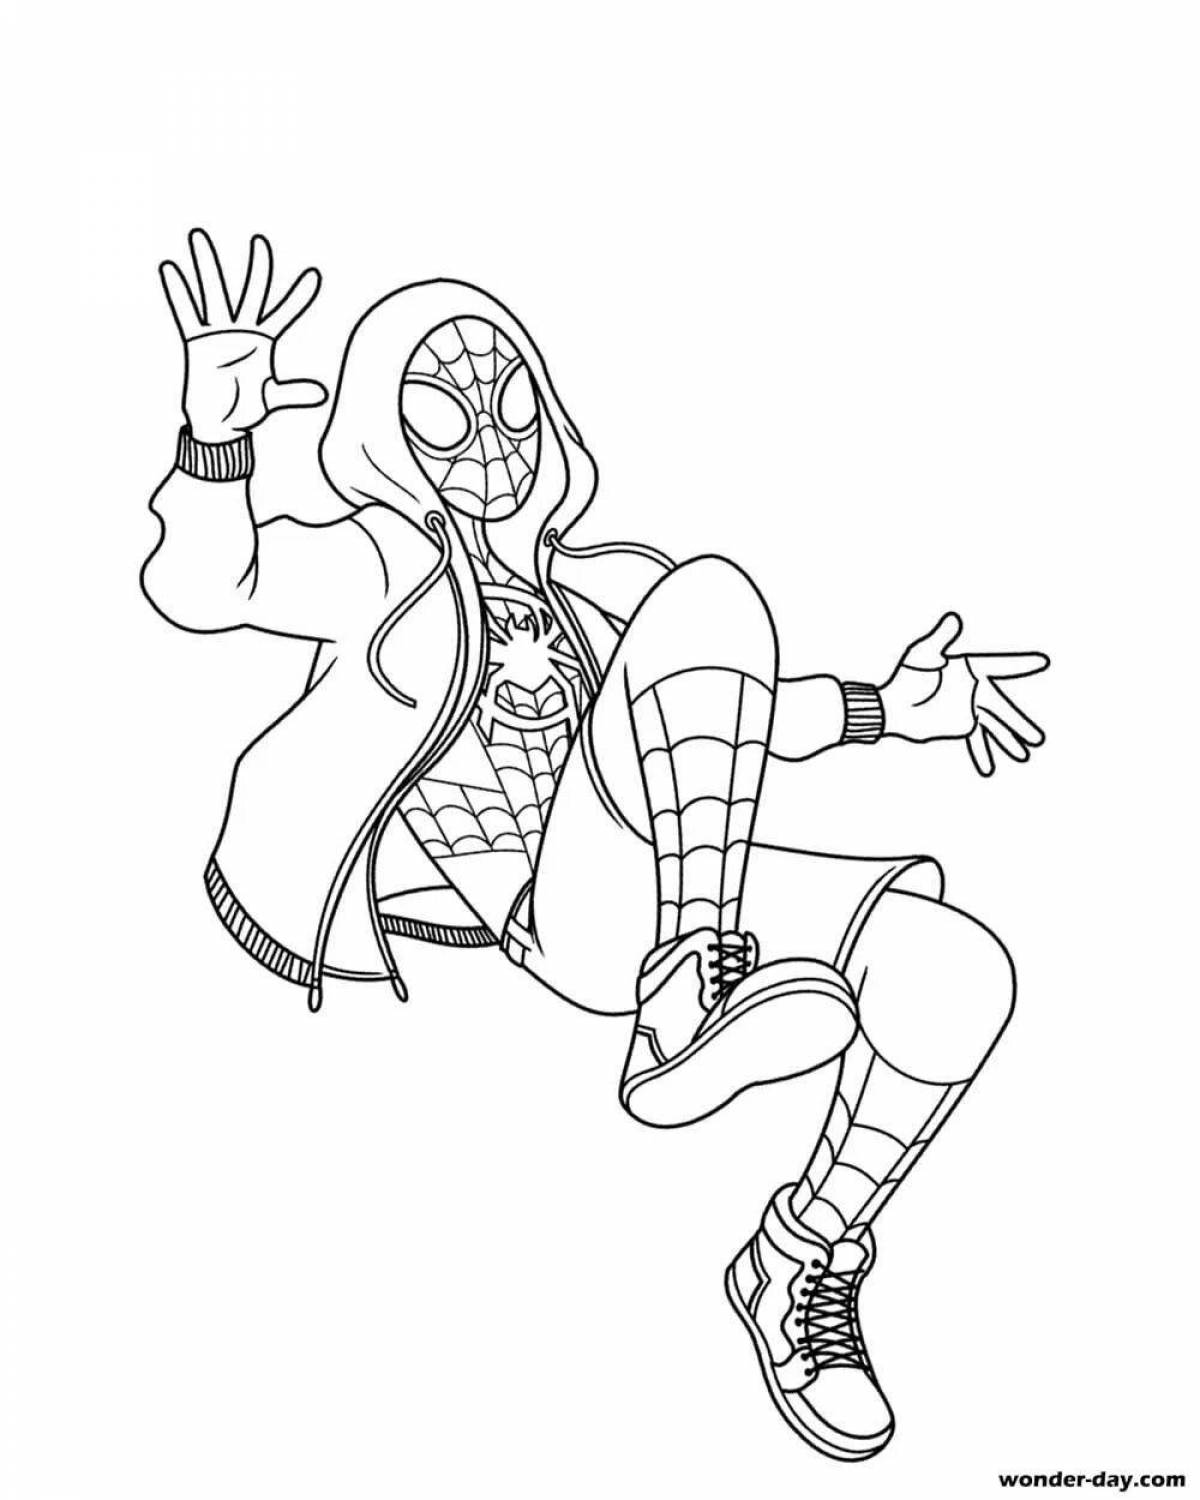 Coloring page funny spider-man miles